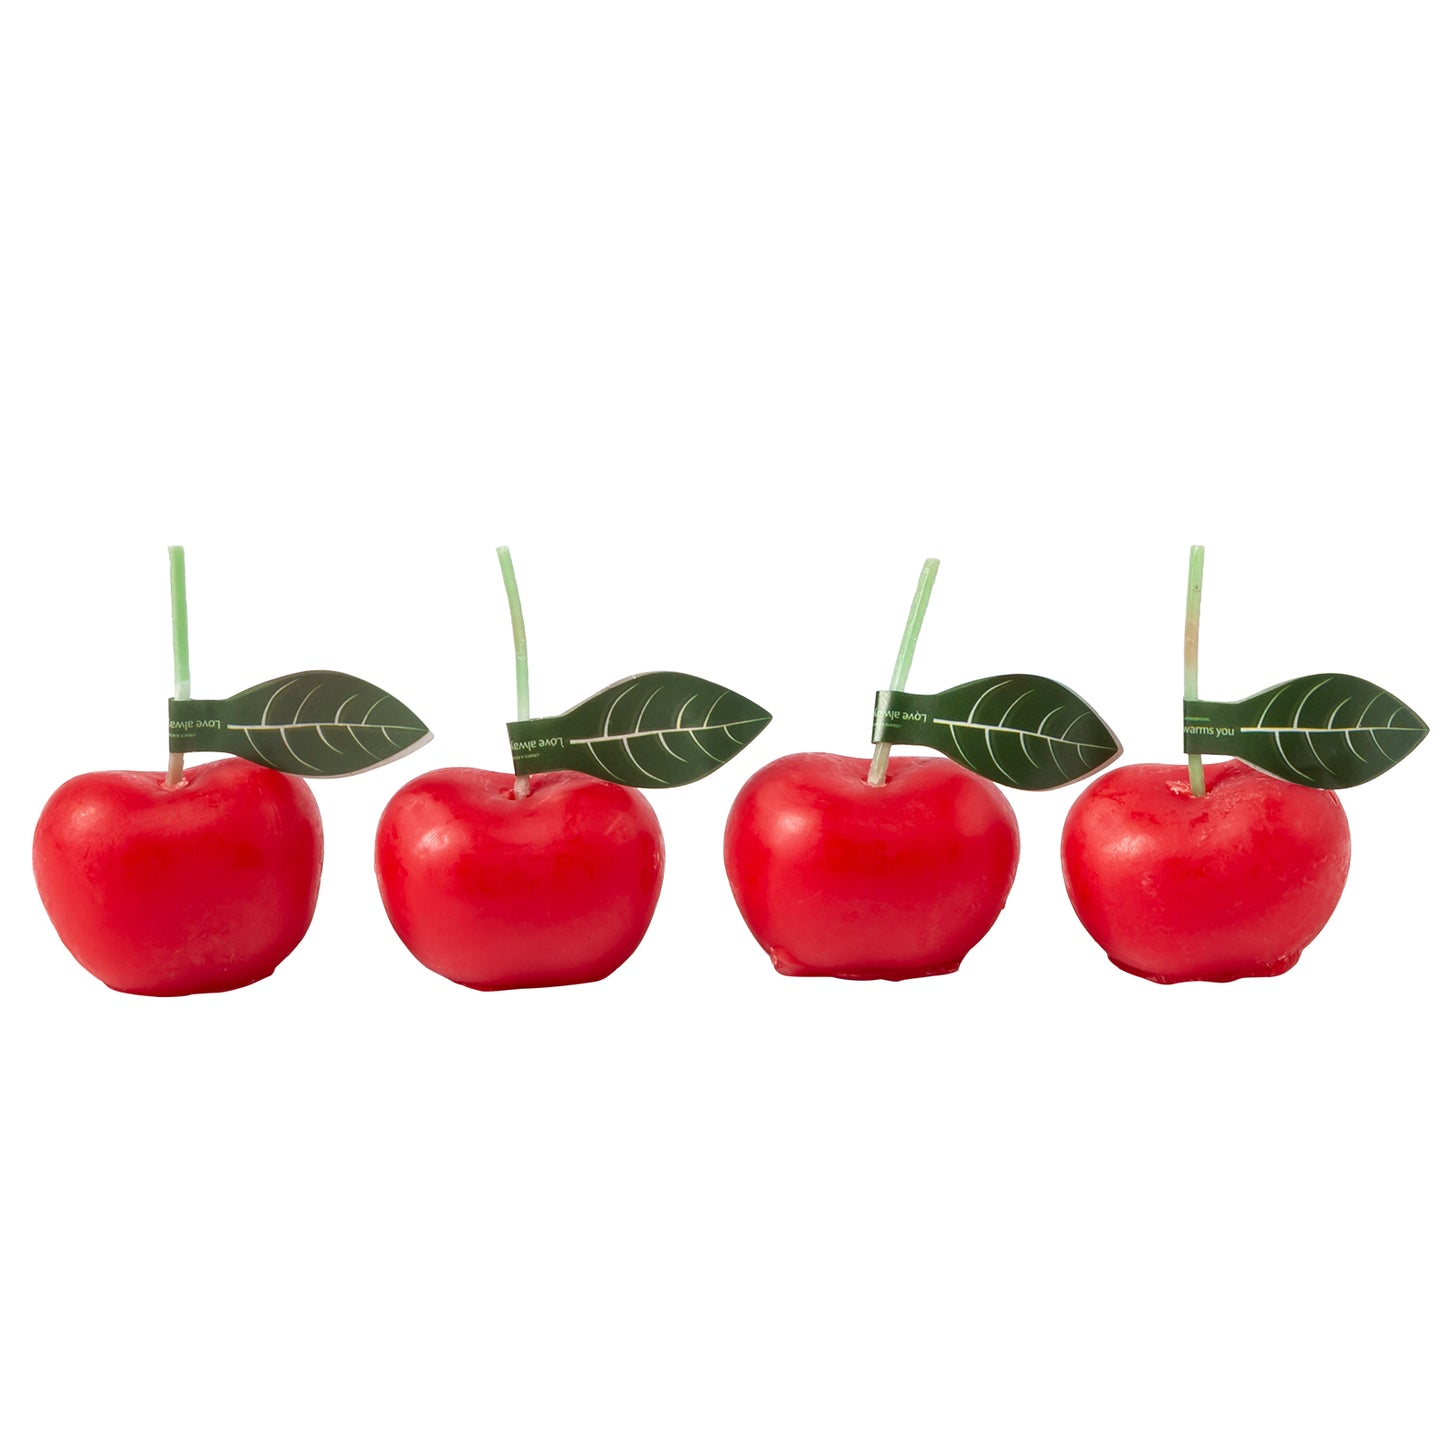 REJUUV 4Pcs Cherries Shaped Scented Candle with Sweet Fruit Aroma - Red, Black Red